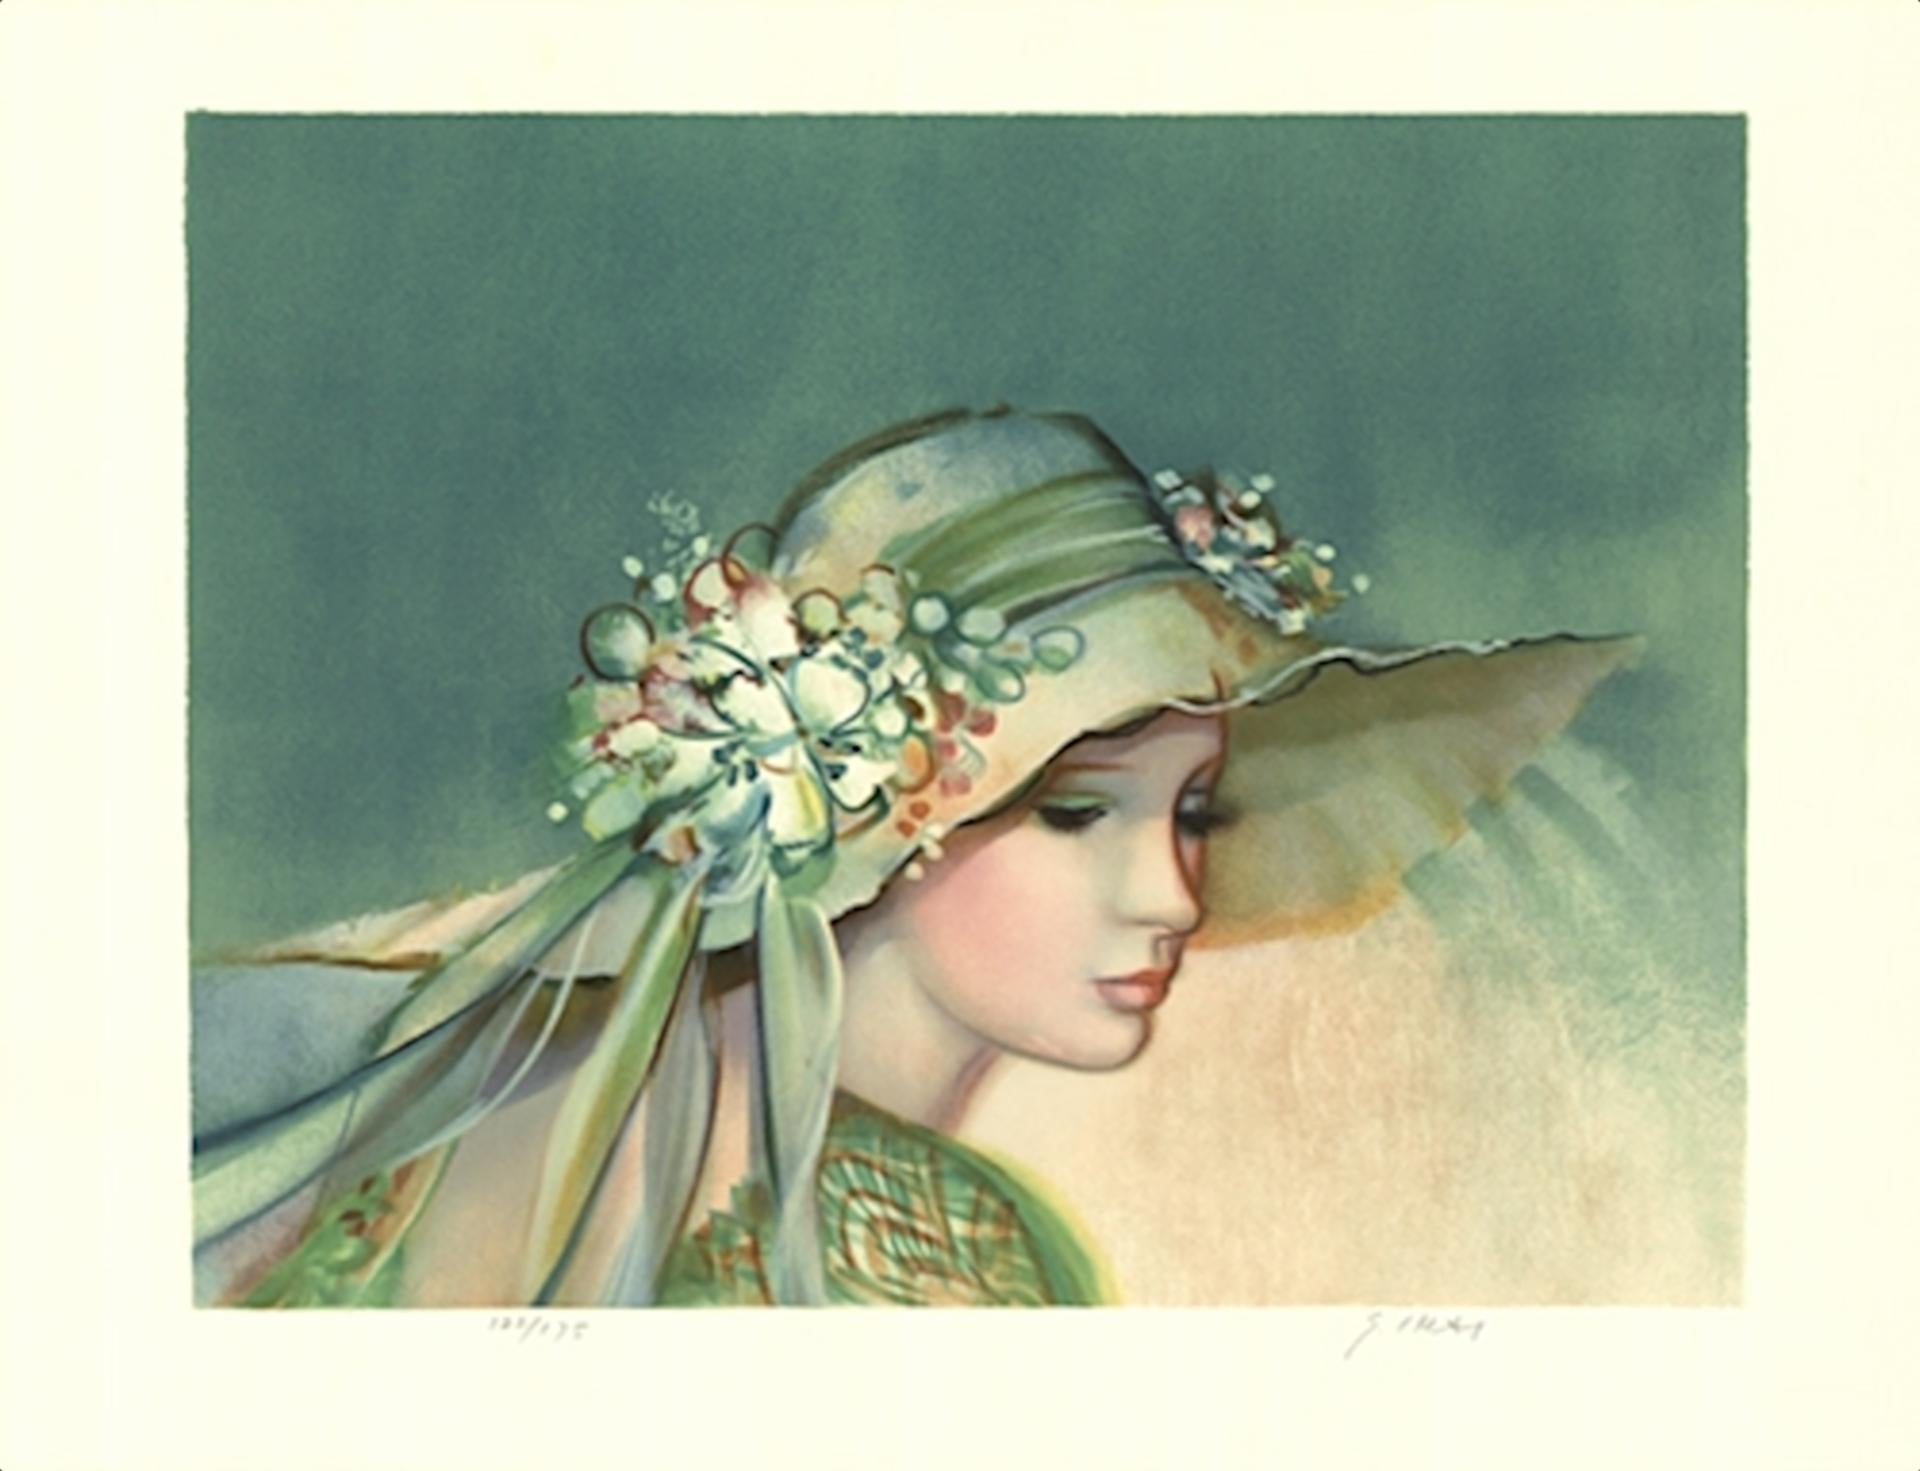 G. Junai - "Woman with hat" - colour lithograph